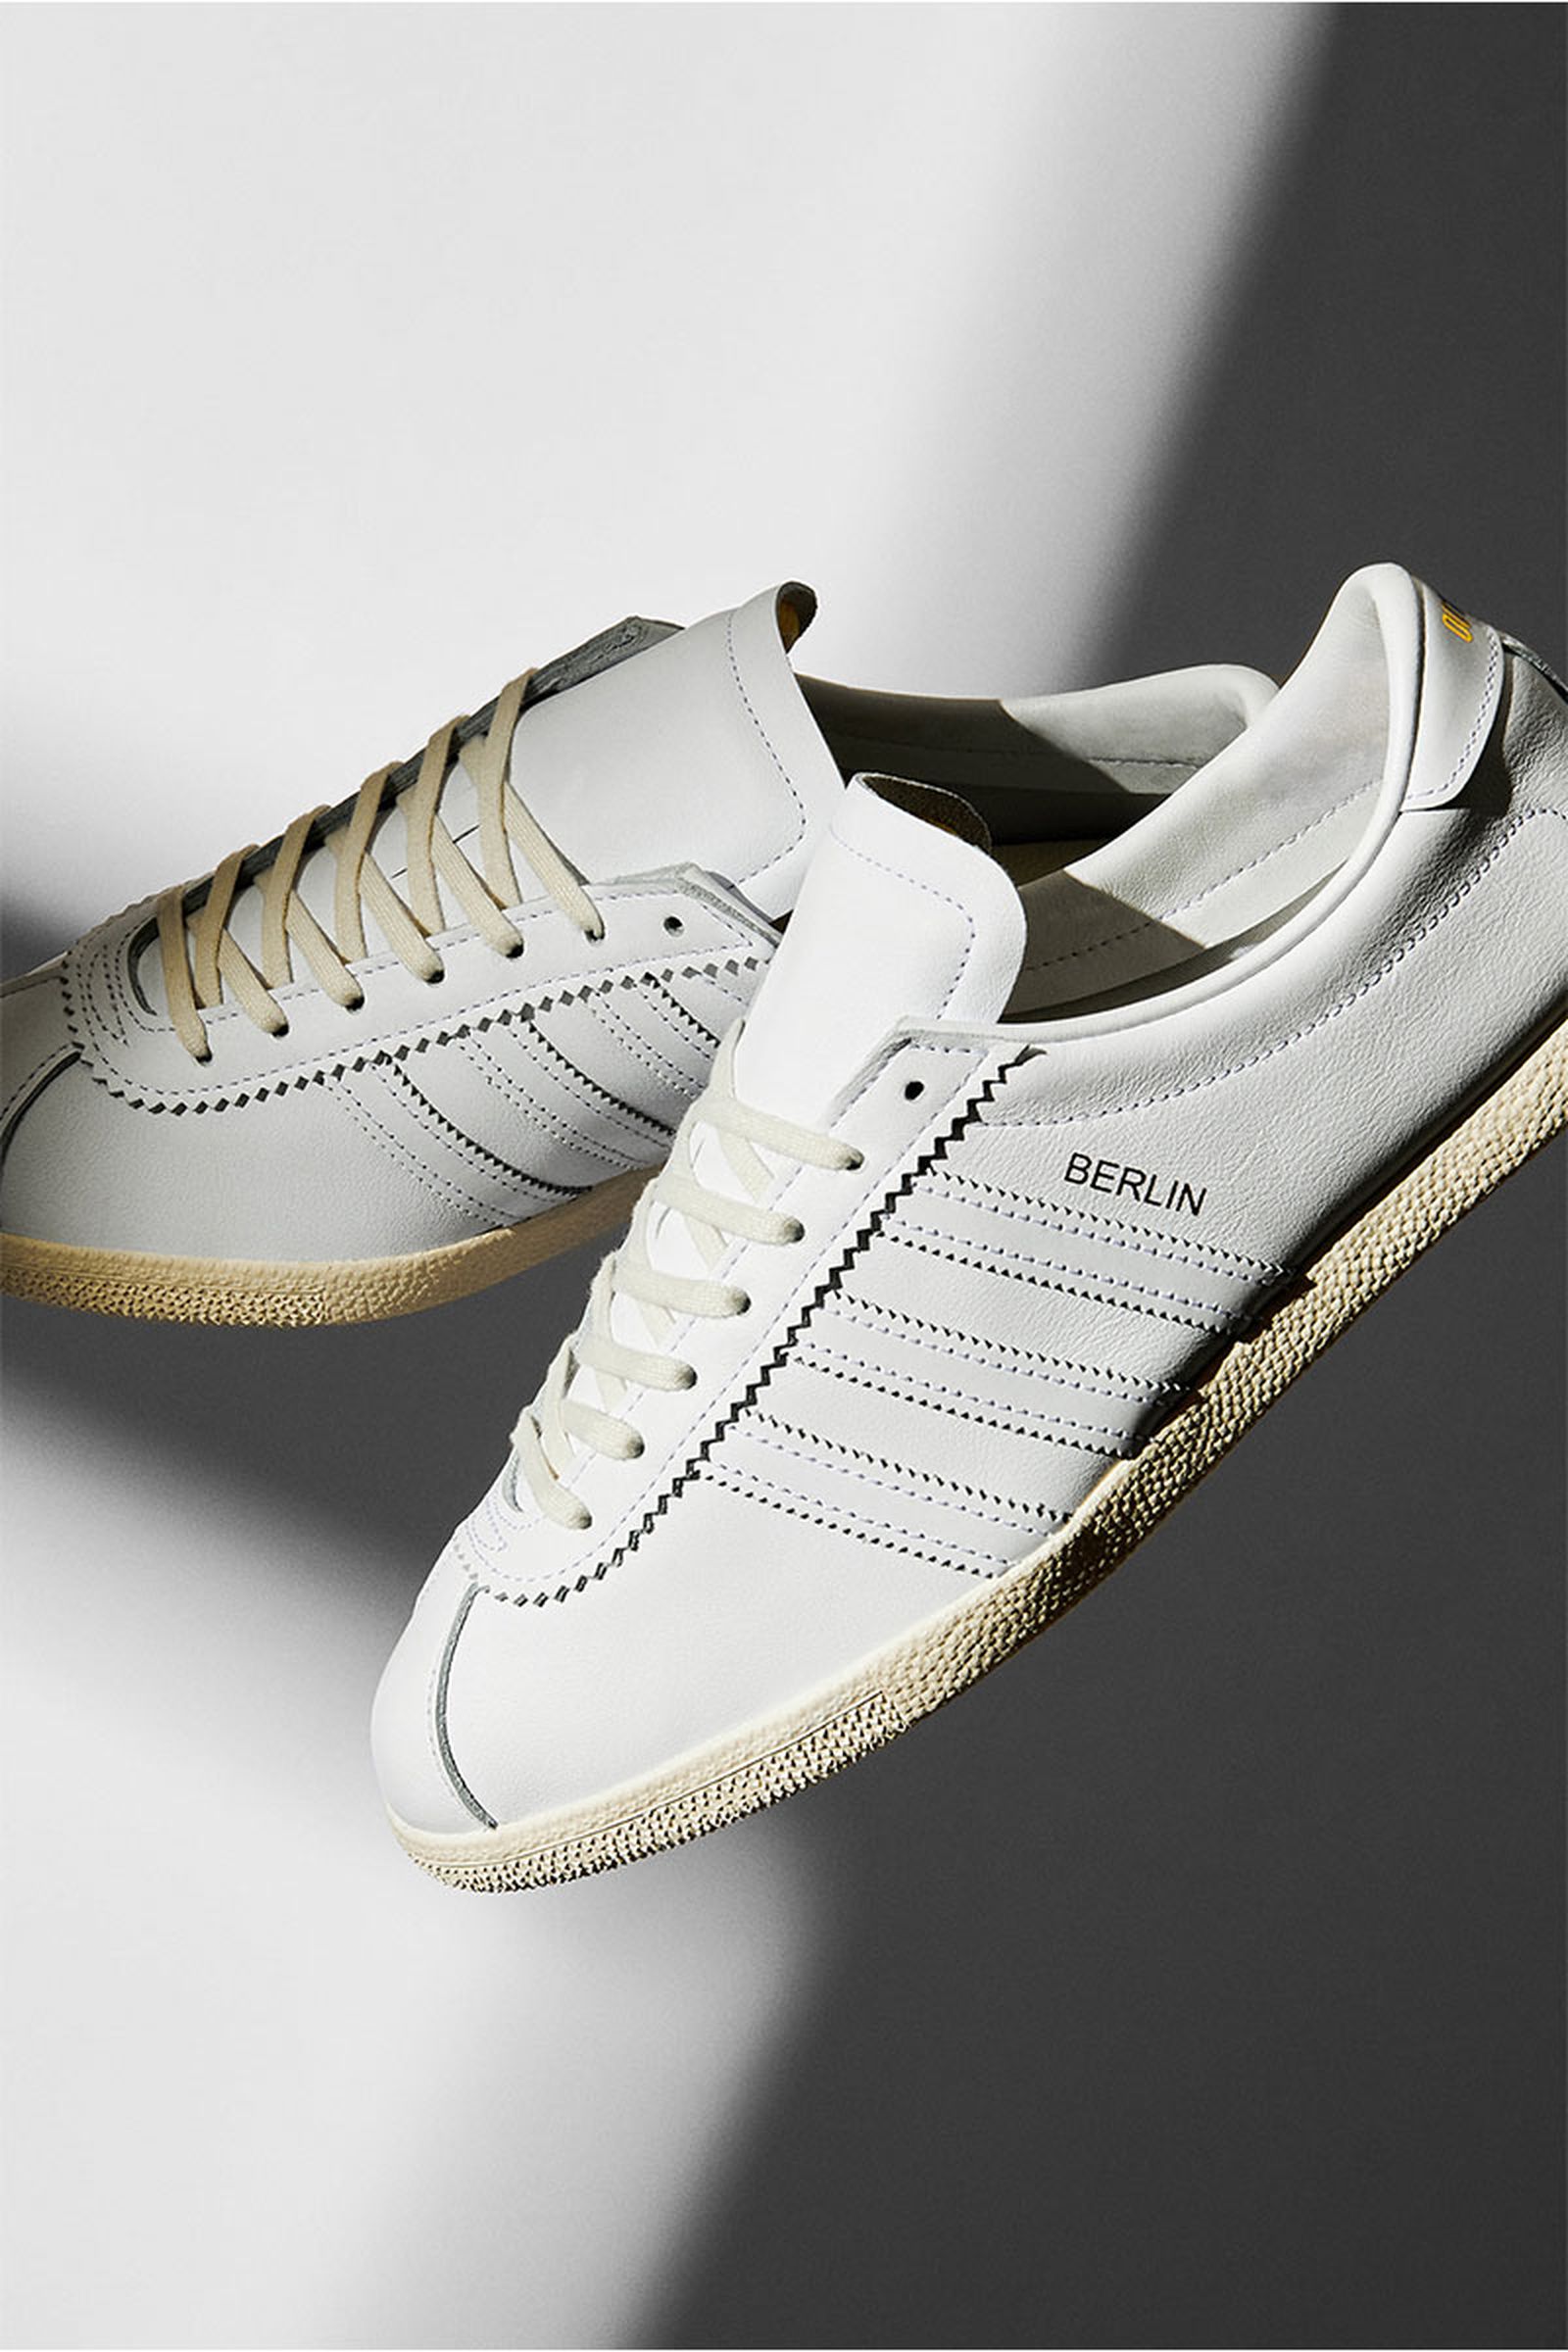 On the ground Loneliness By name END. x adidas Made in Germany Berlin: Release Date, Info, Price